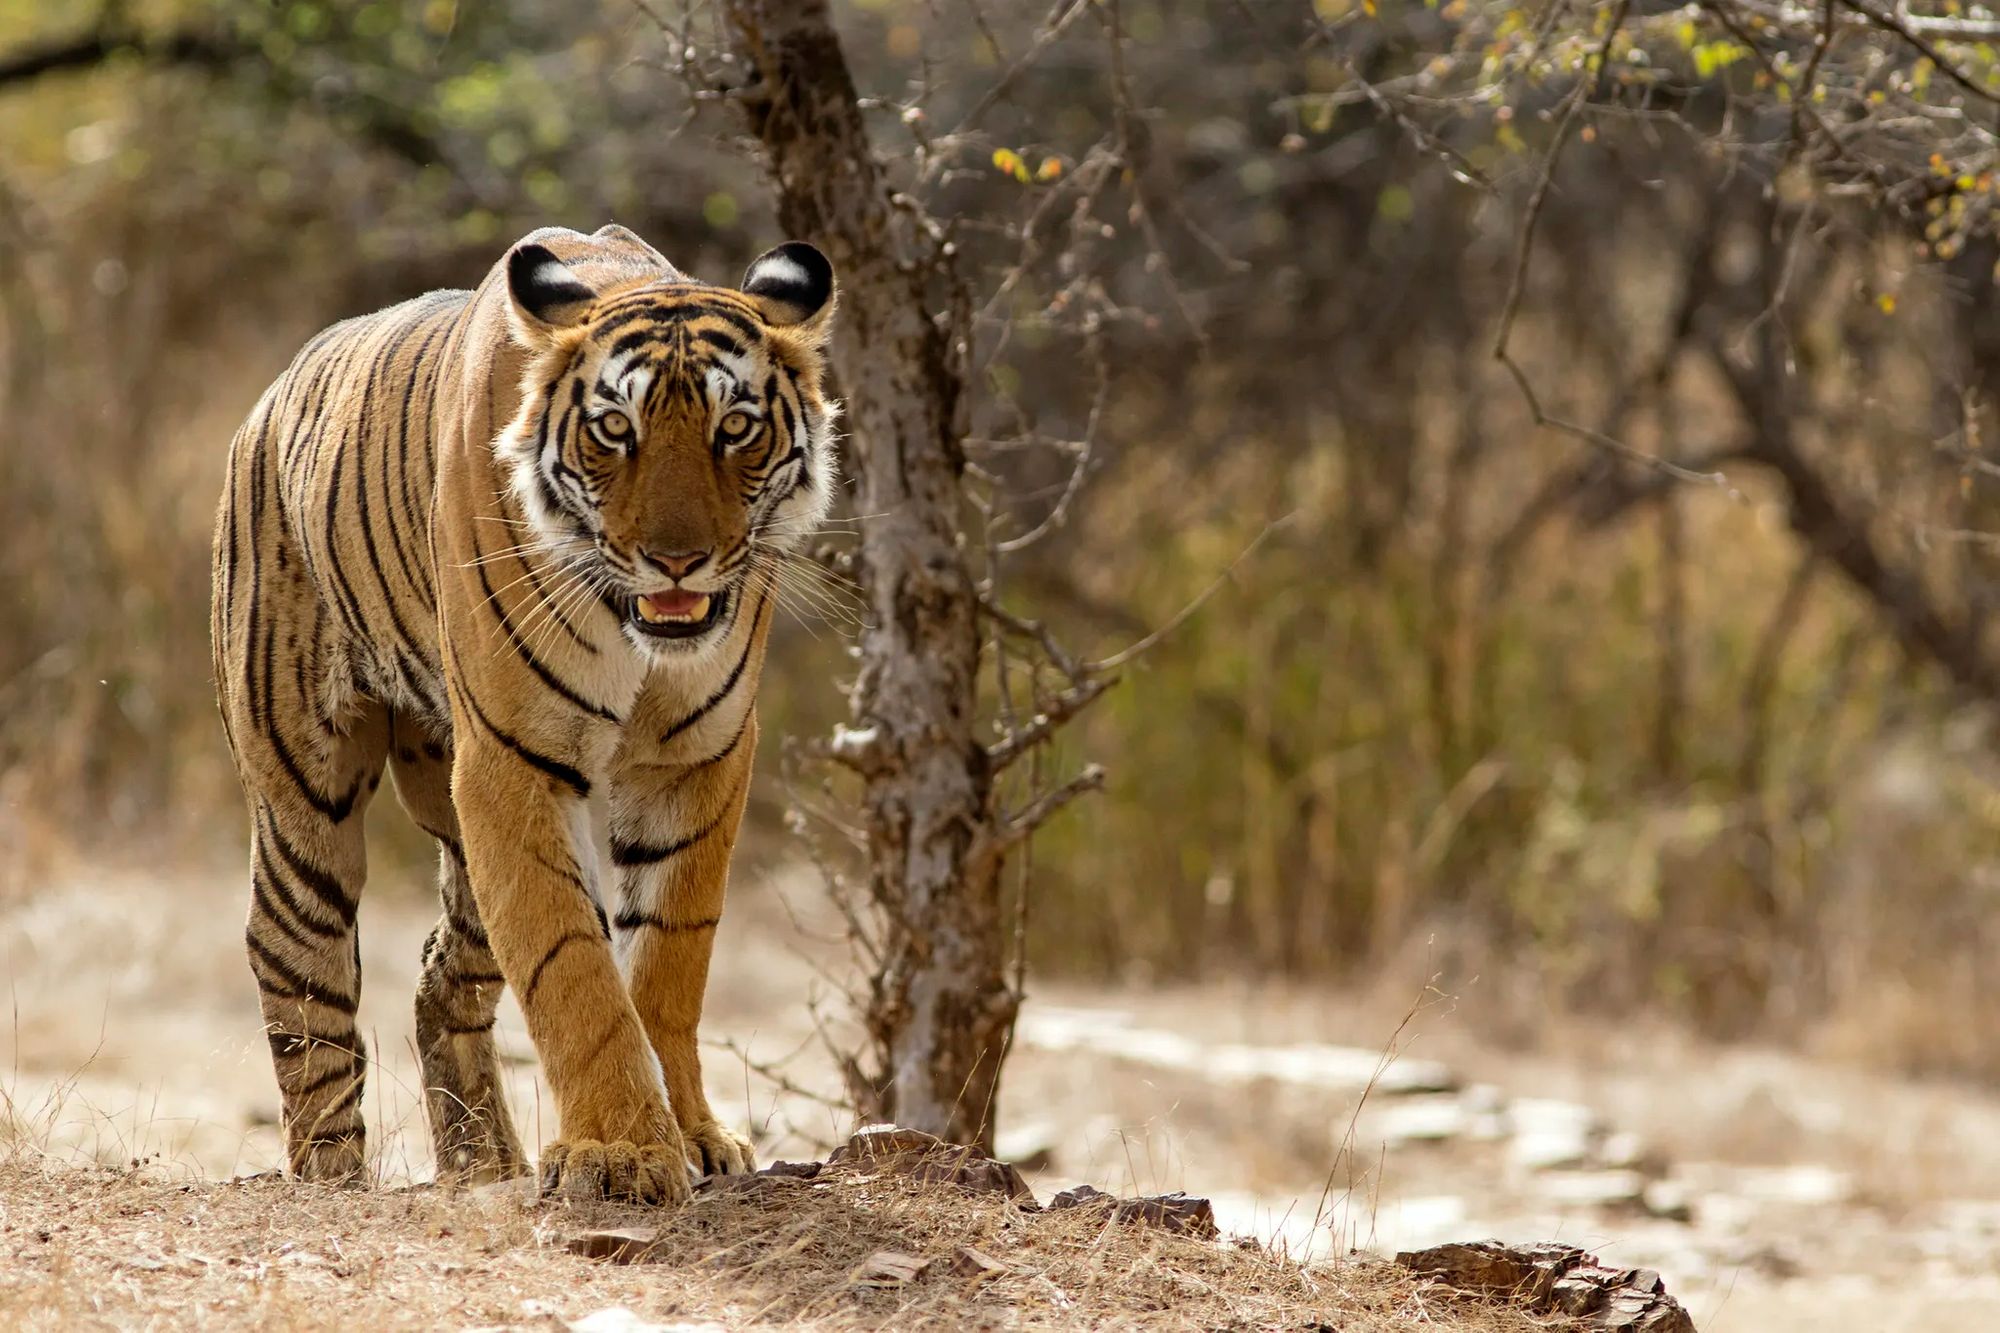 A tiger in Ranthambore National Park.